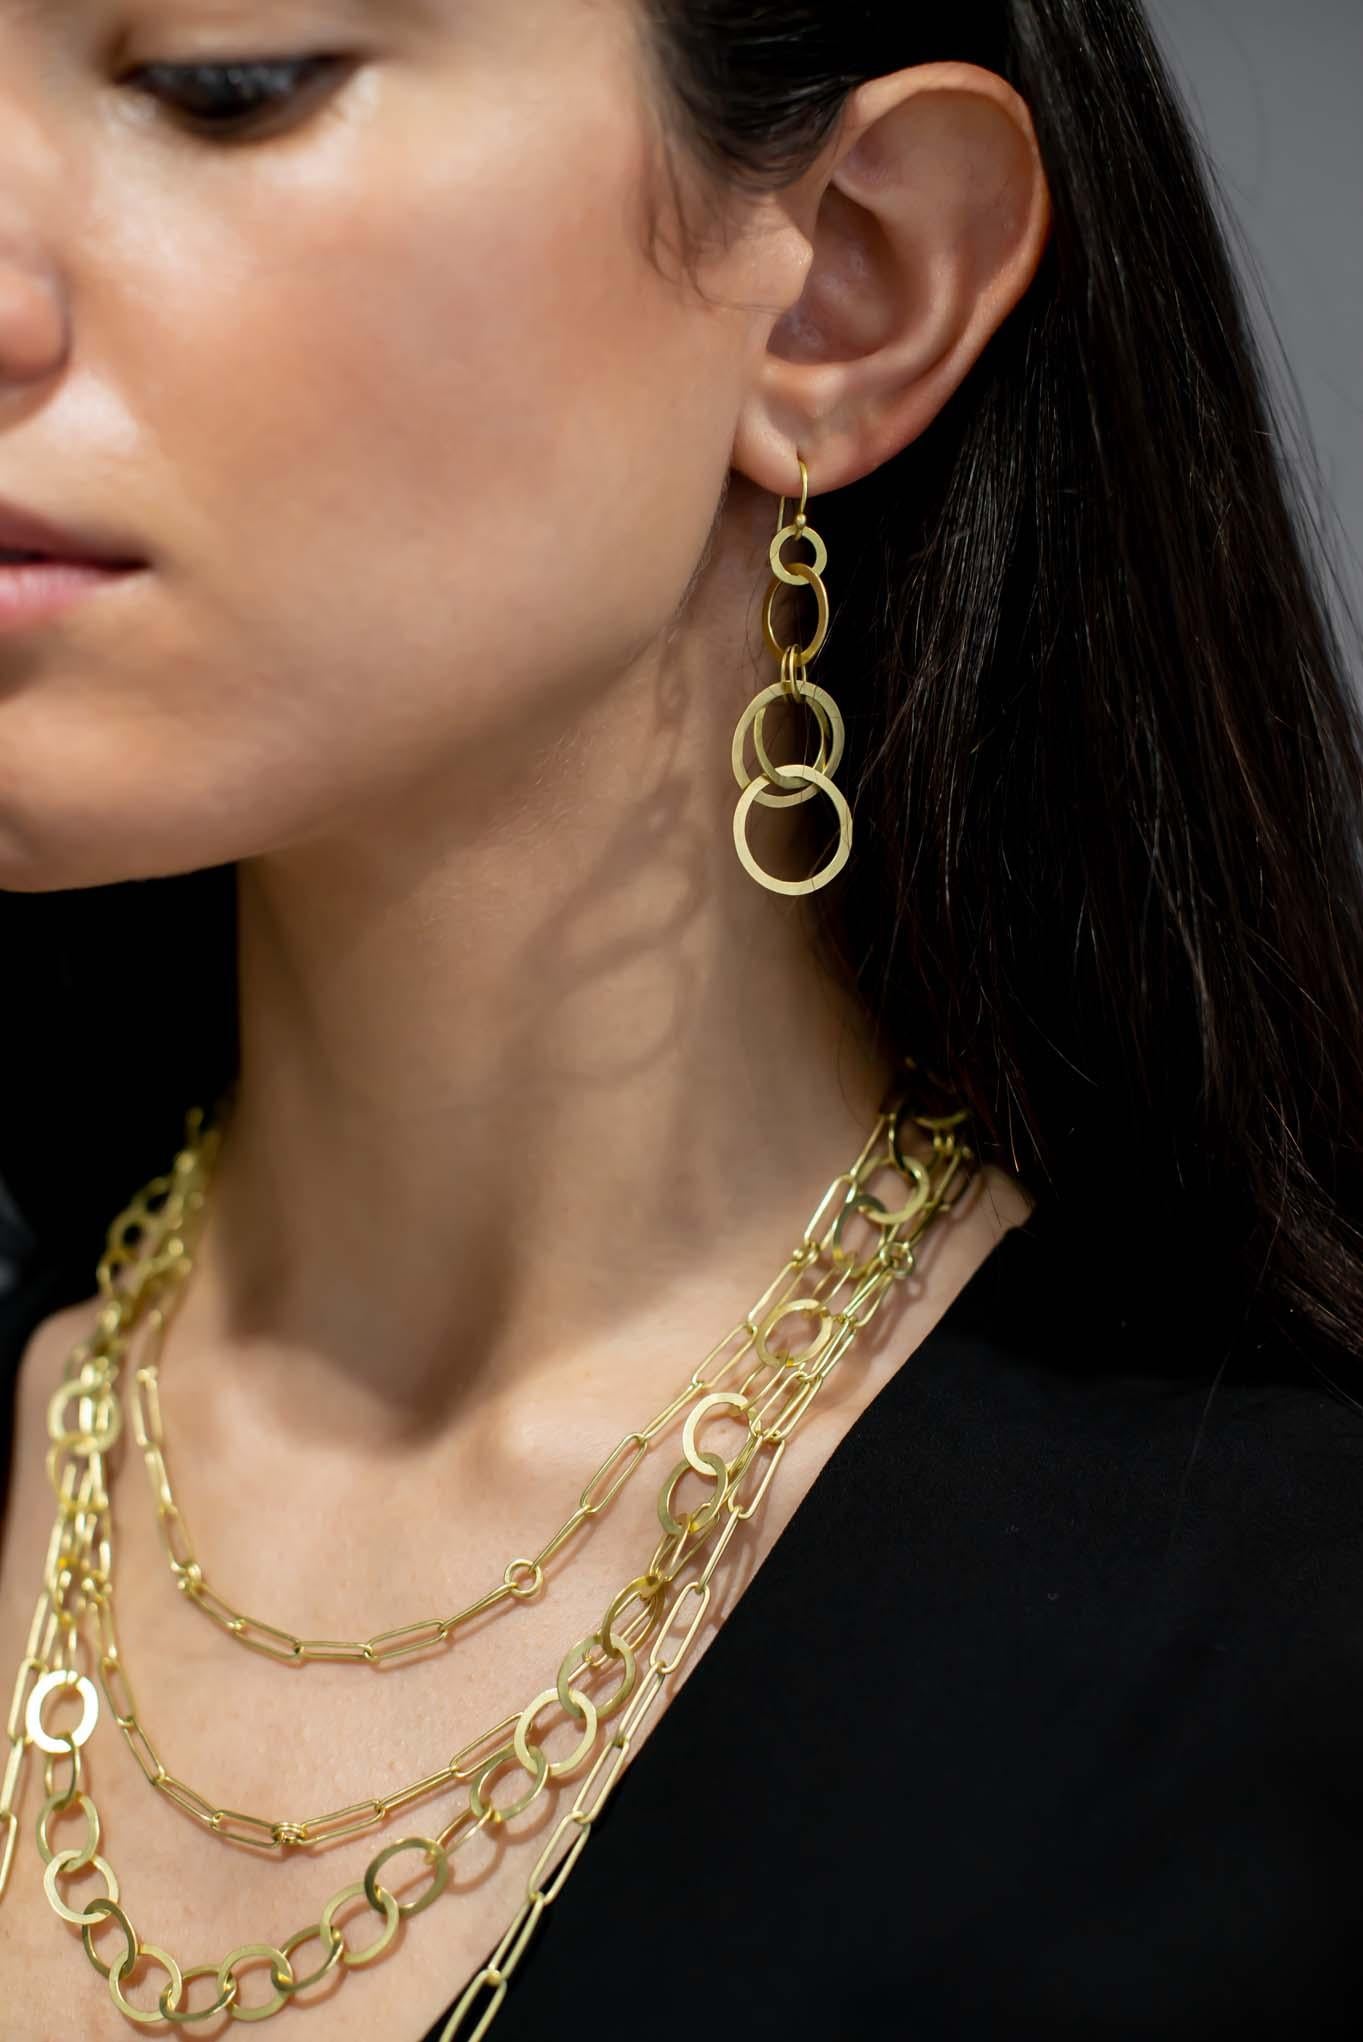 Faye Kim's 18 Karat Gold Large Planished Multi Loop Earrings on hinged ear wires are an instant classic, and can be worn with virtually any outfit, for any occasion. The gold loops are hand planished and matte-finished, adding texture and dimension.